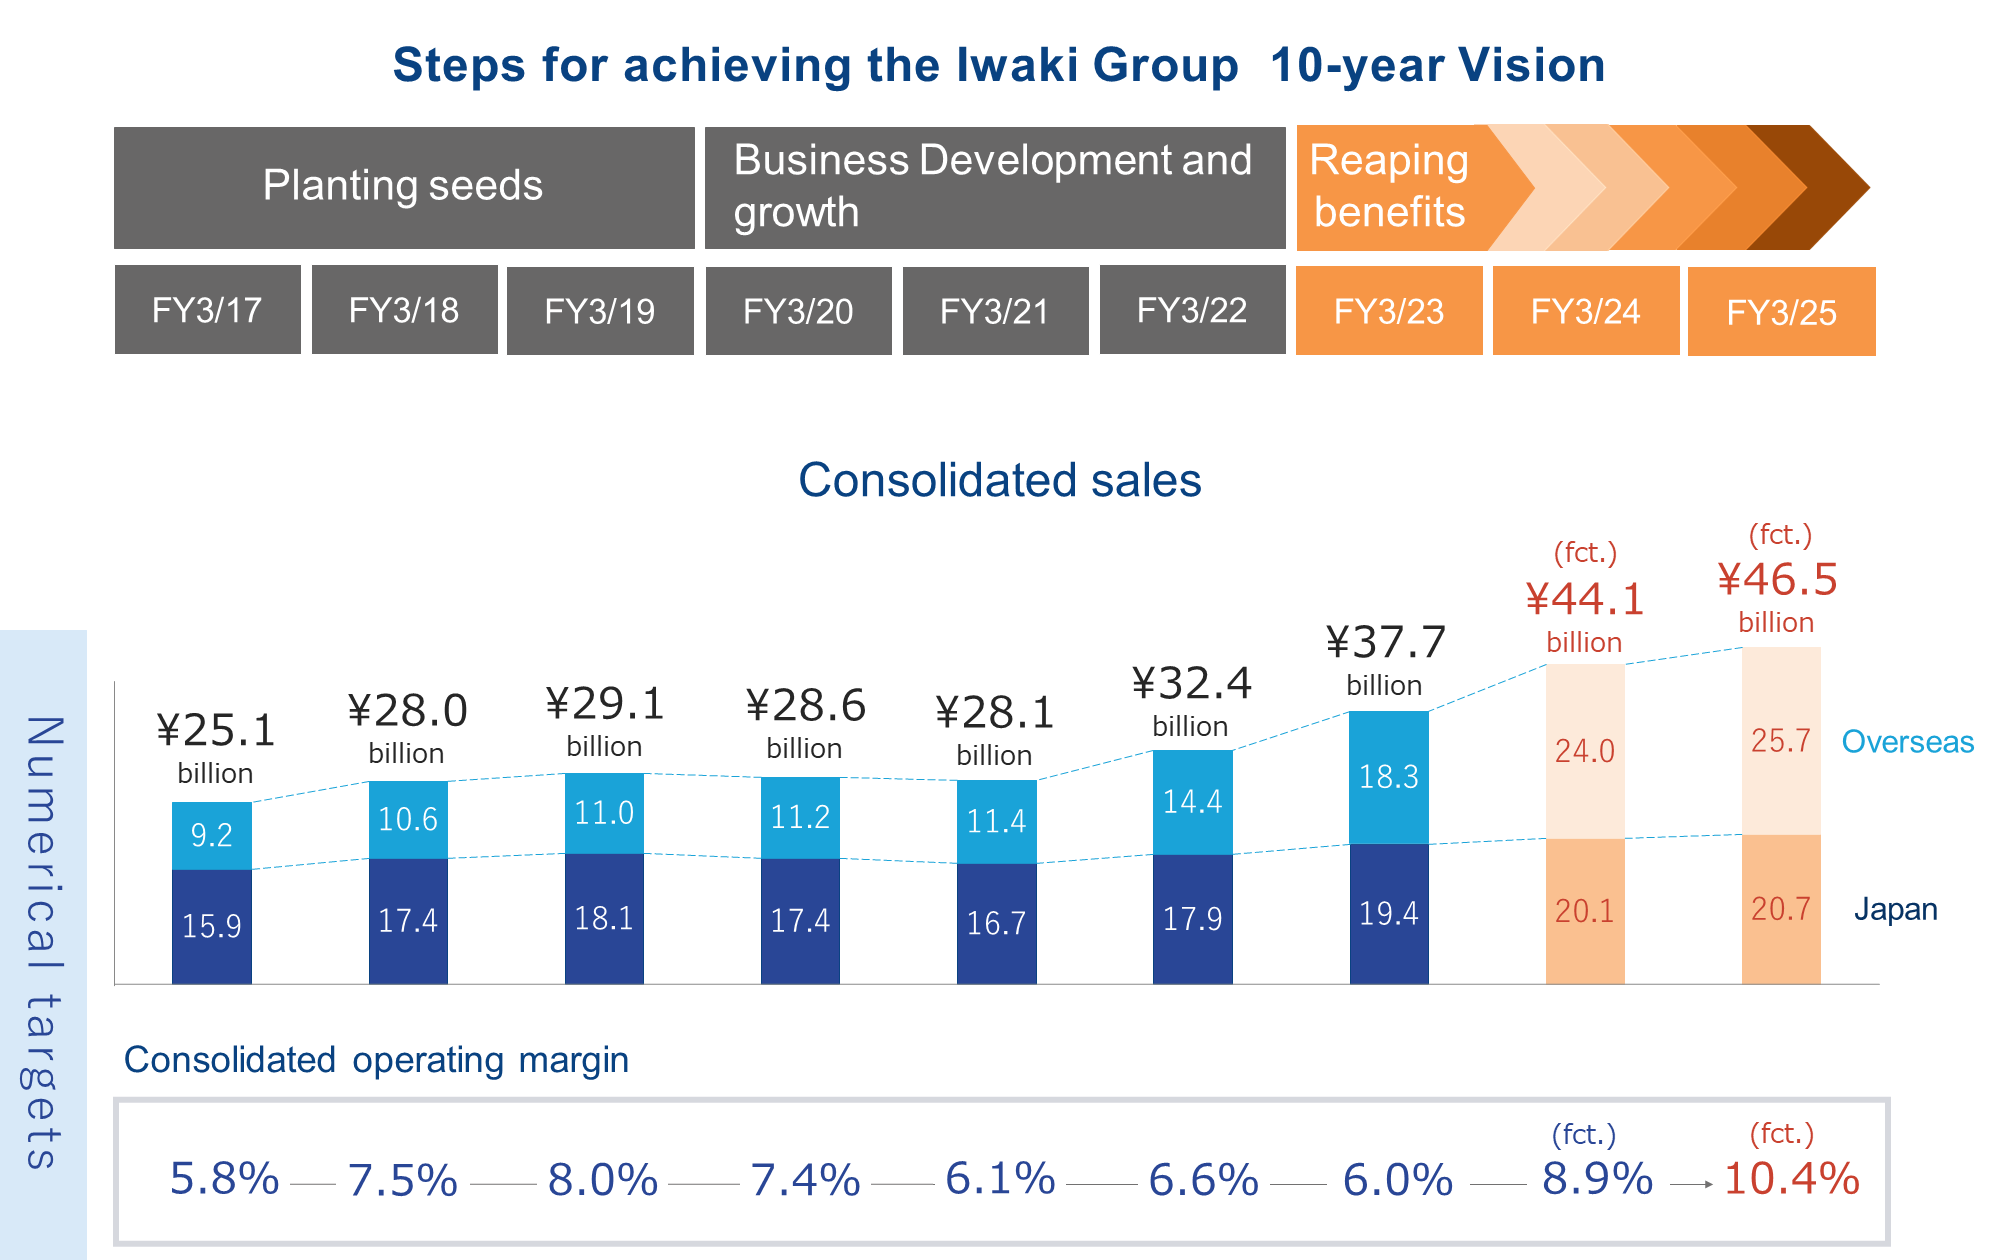 Iwaki established the Iwaki Group 10-year Vision with the goals of making the Iwaki Group the global leader in its industry and increasing net sales to 40 billion yen in the fiscal year ending in March 2025.